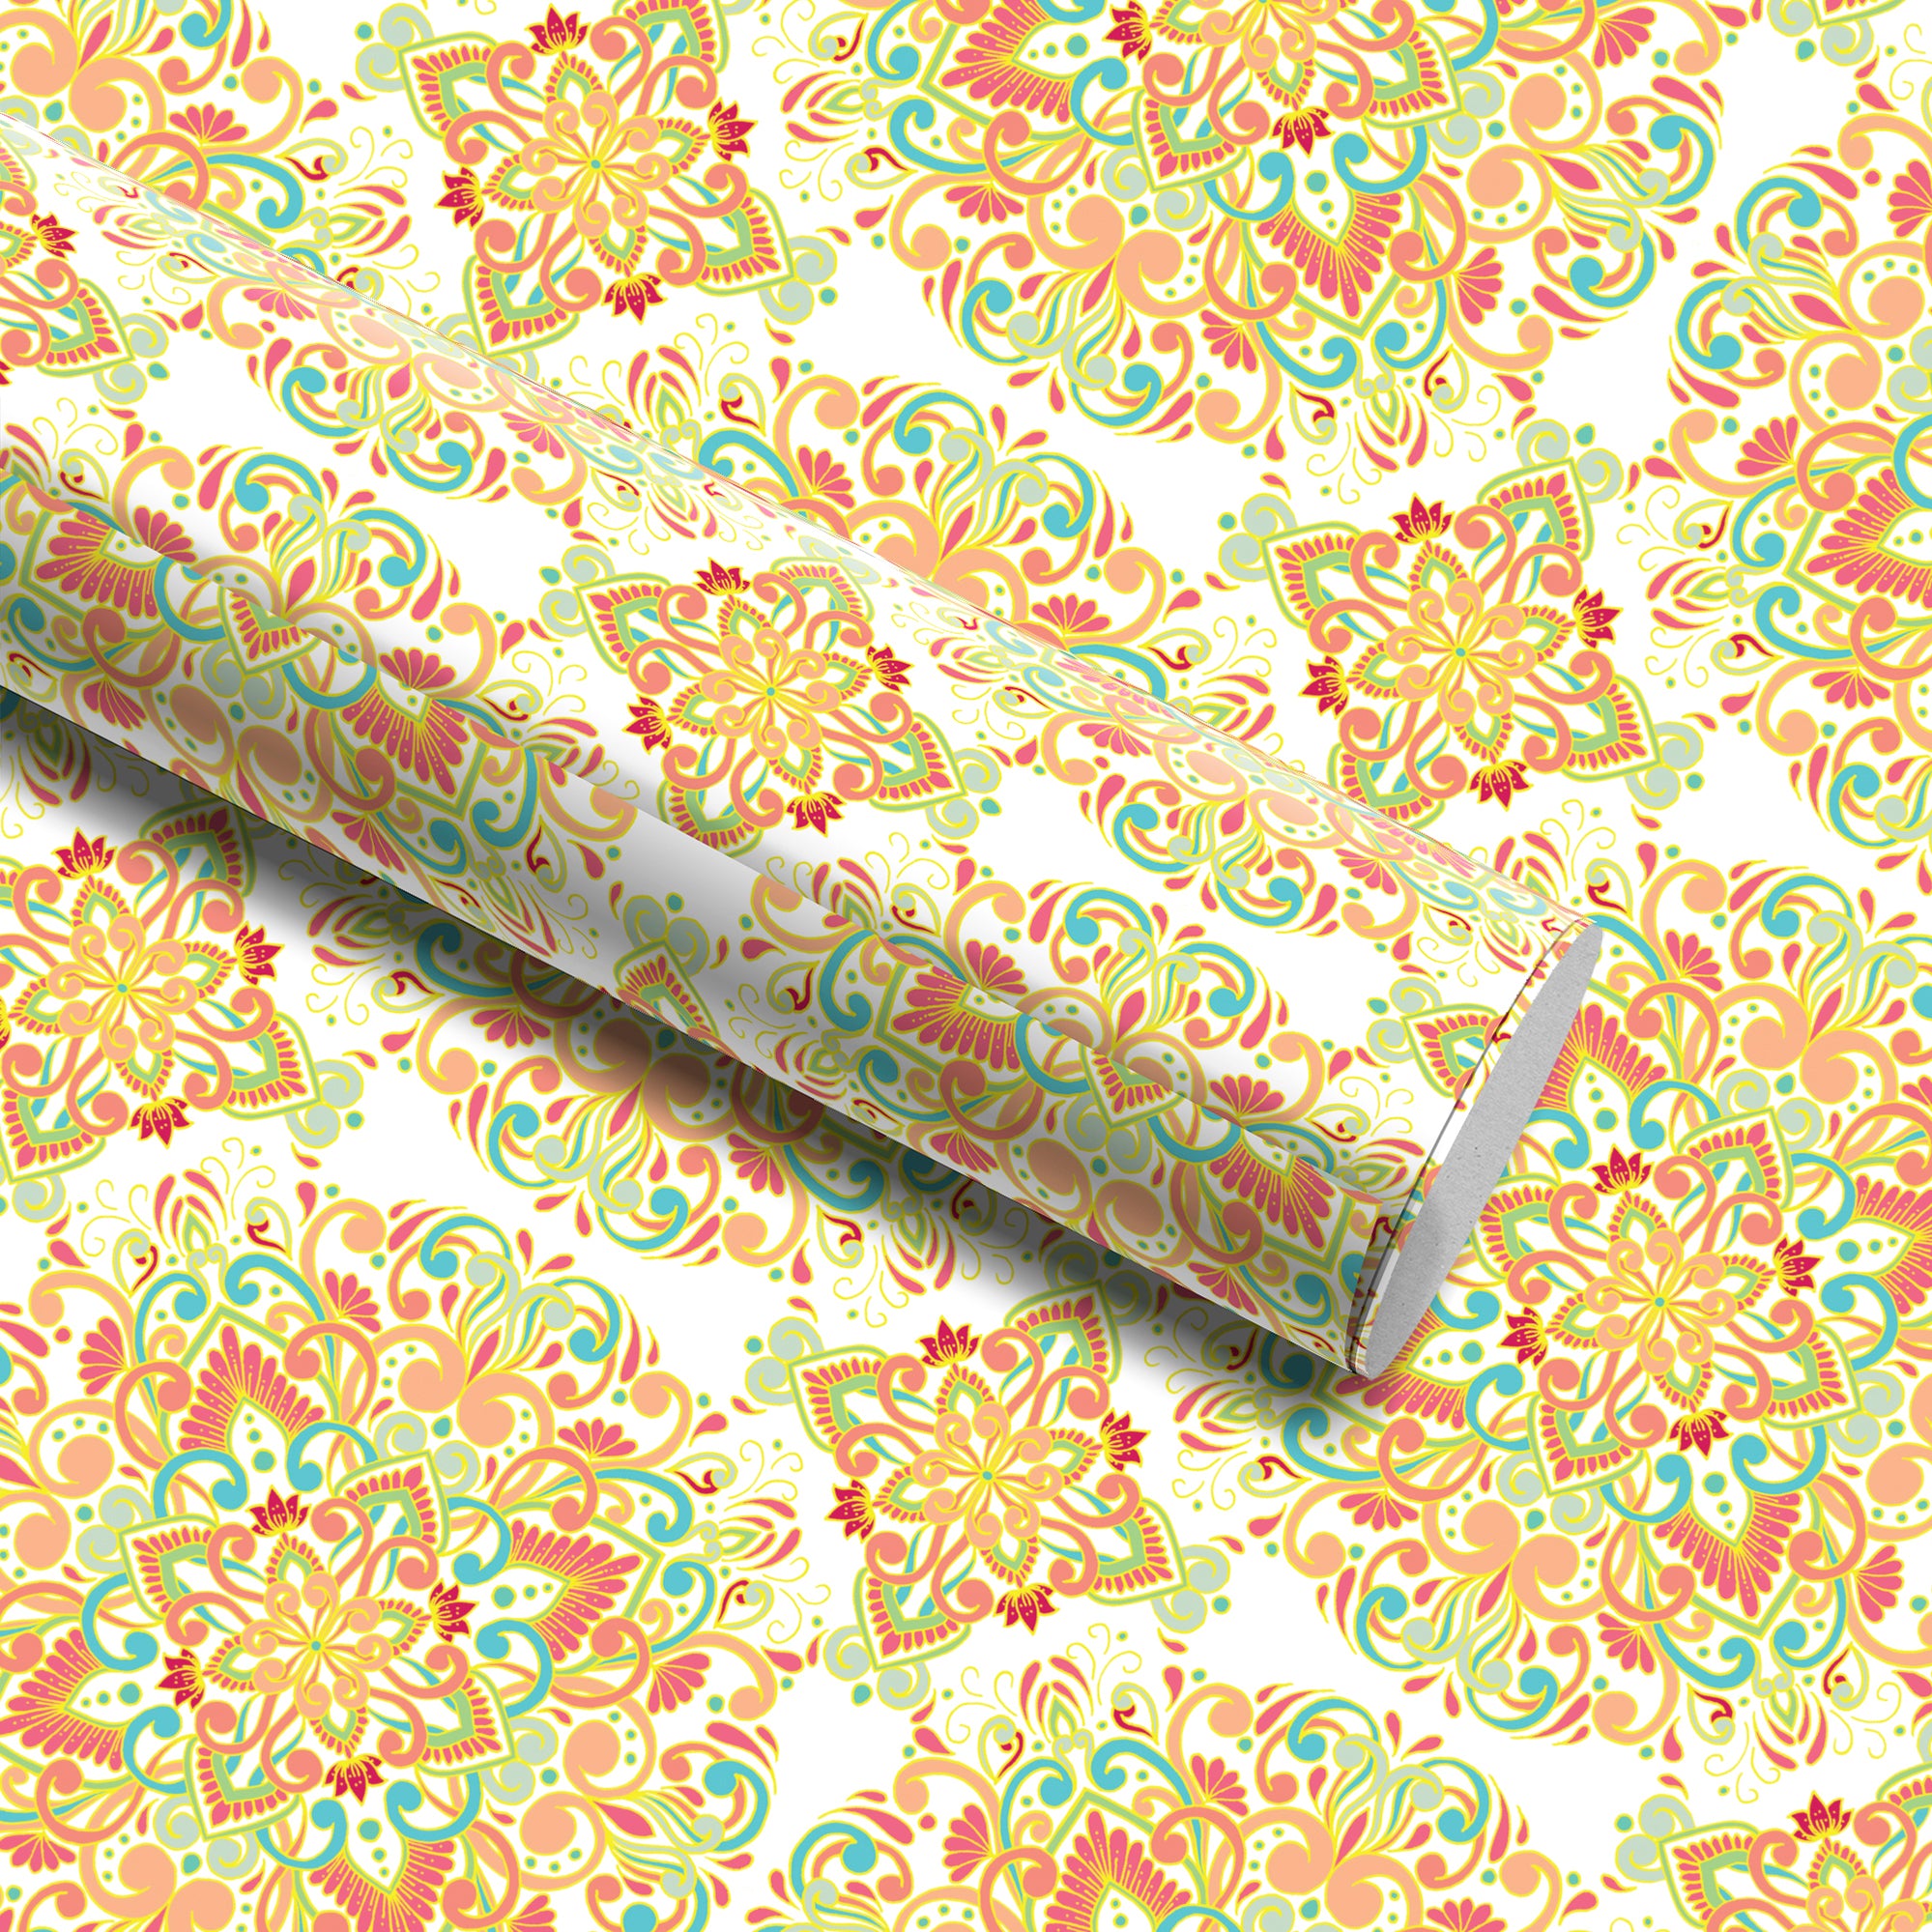 Golden Swirls Wrapping Paper